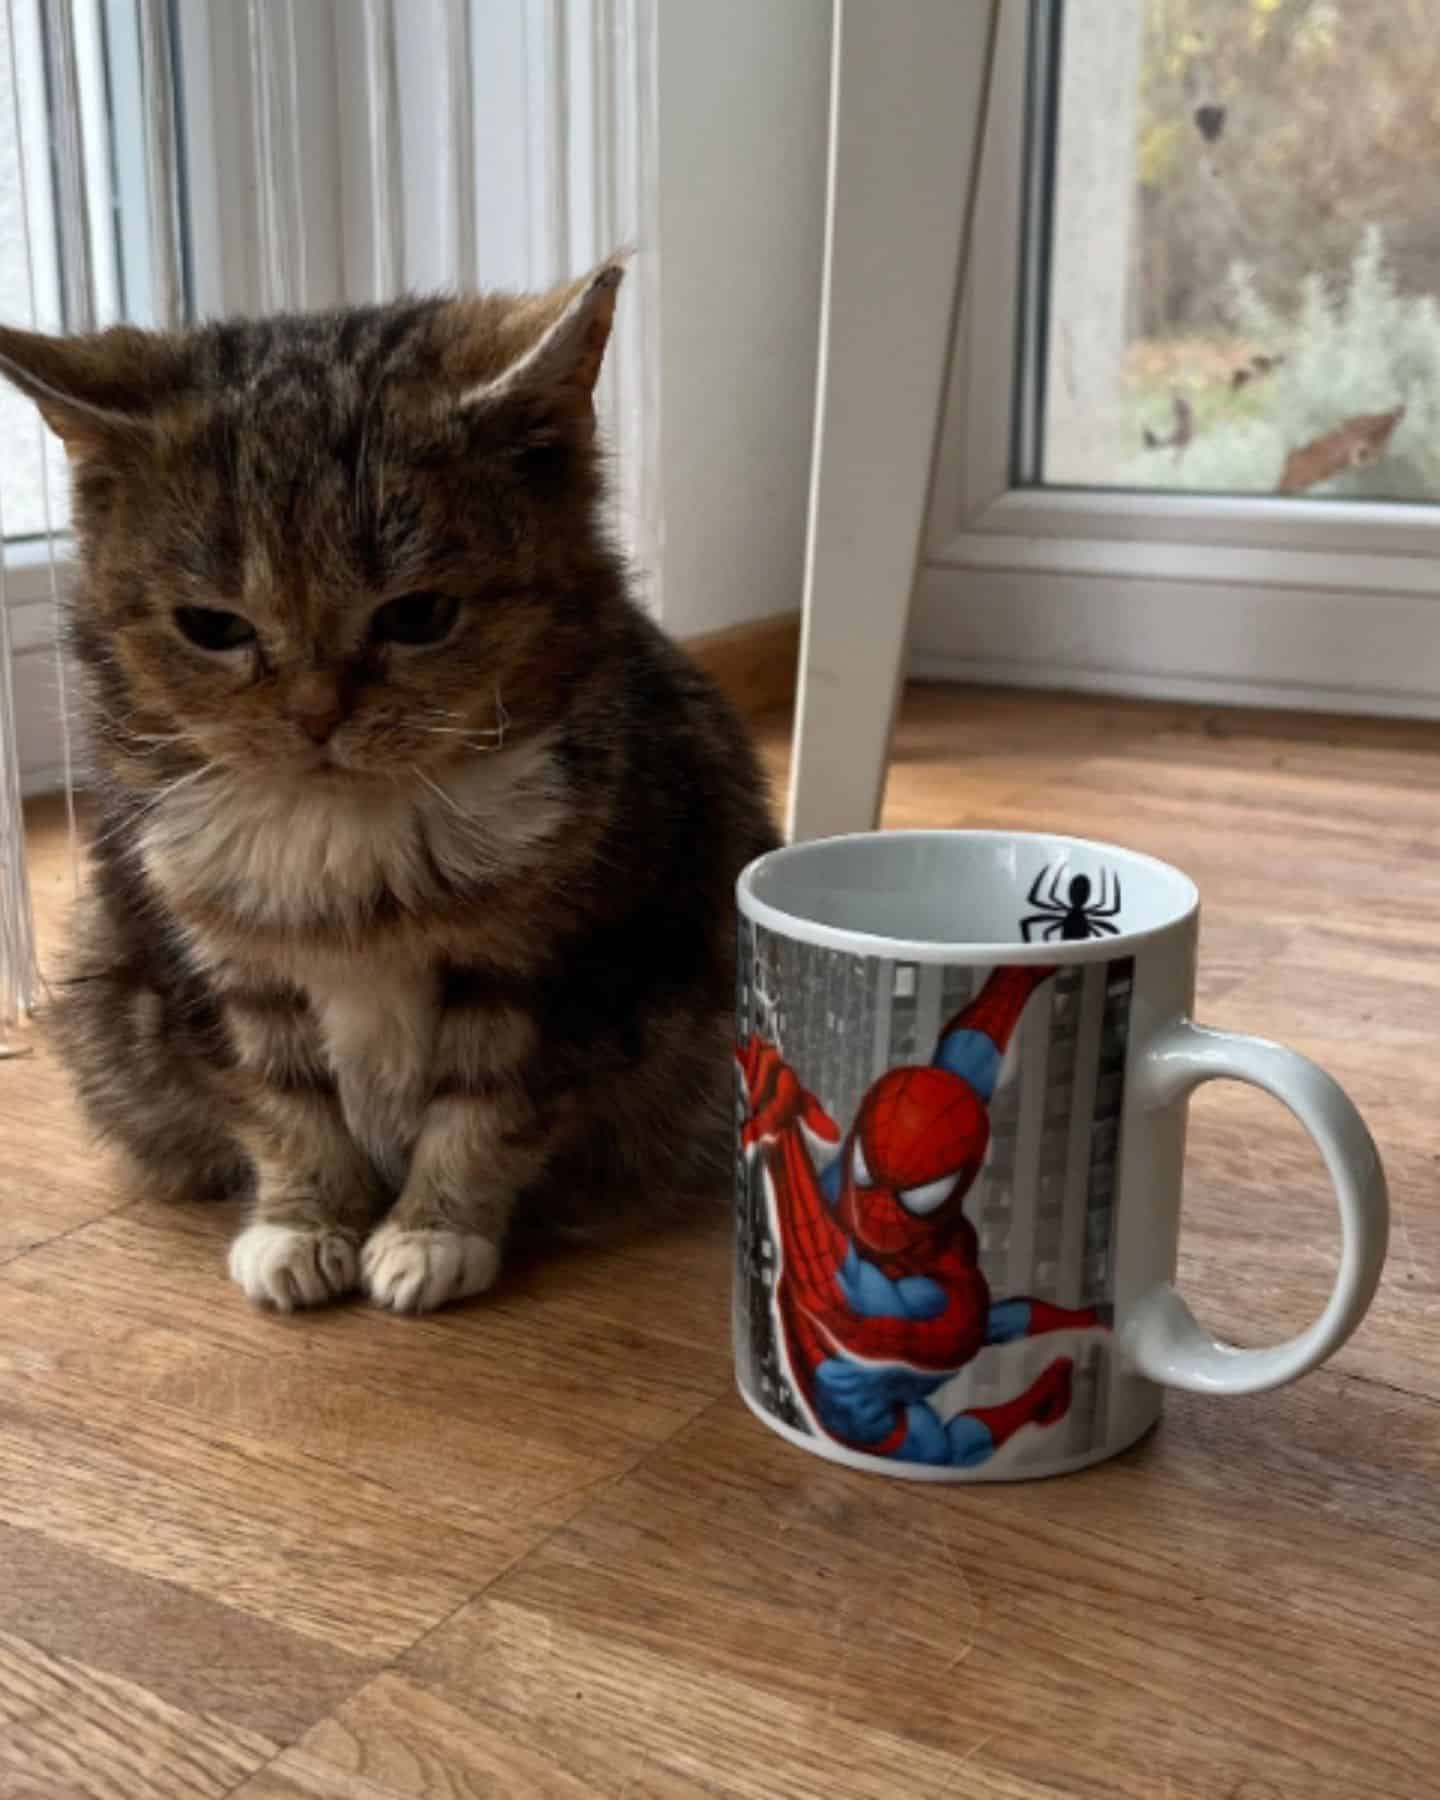 cat next to a cup